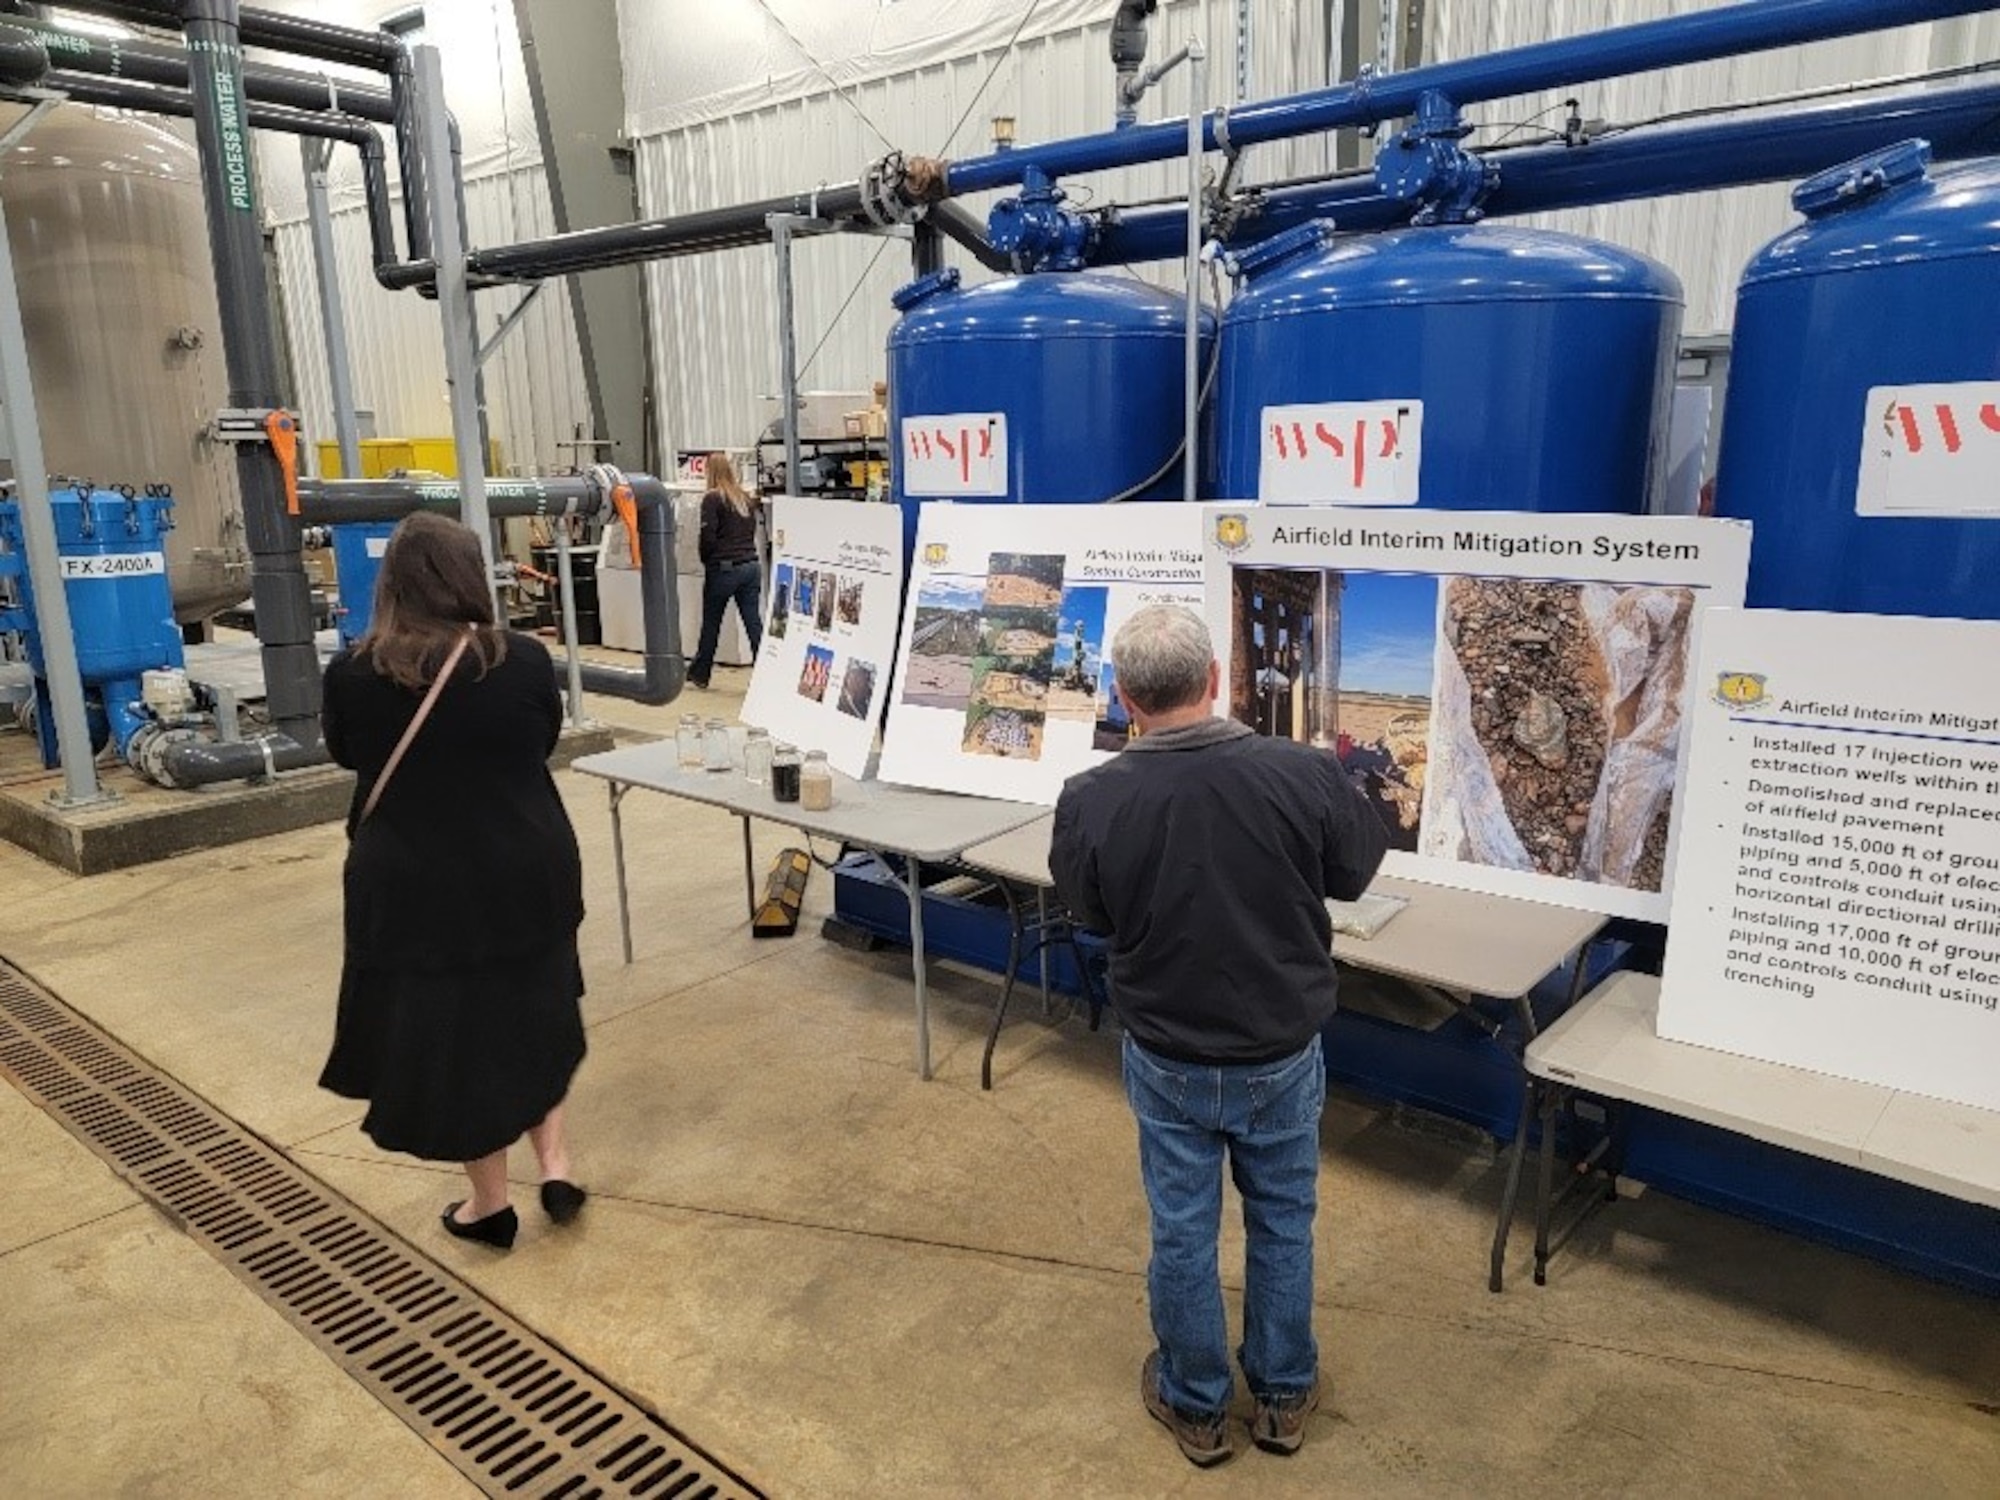 RAB members review equipment and posters explaining cleanup